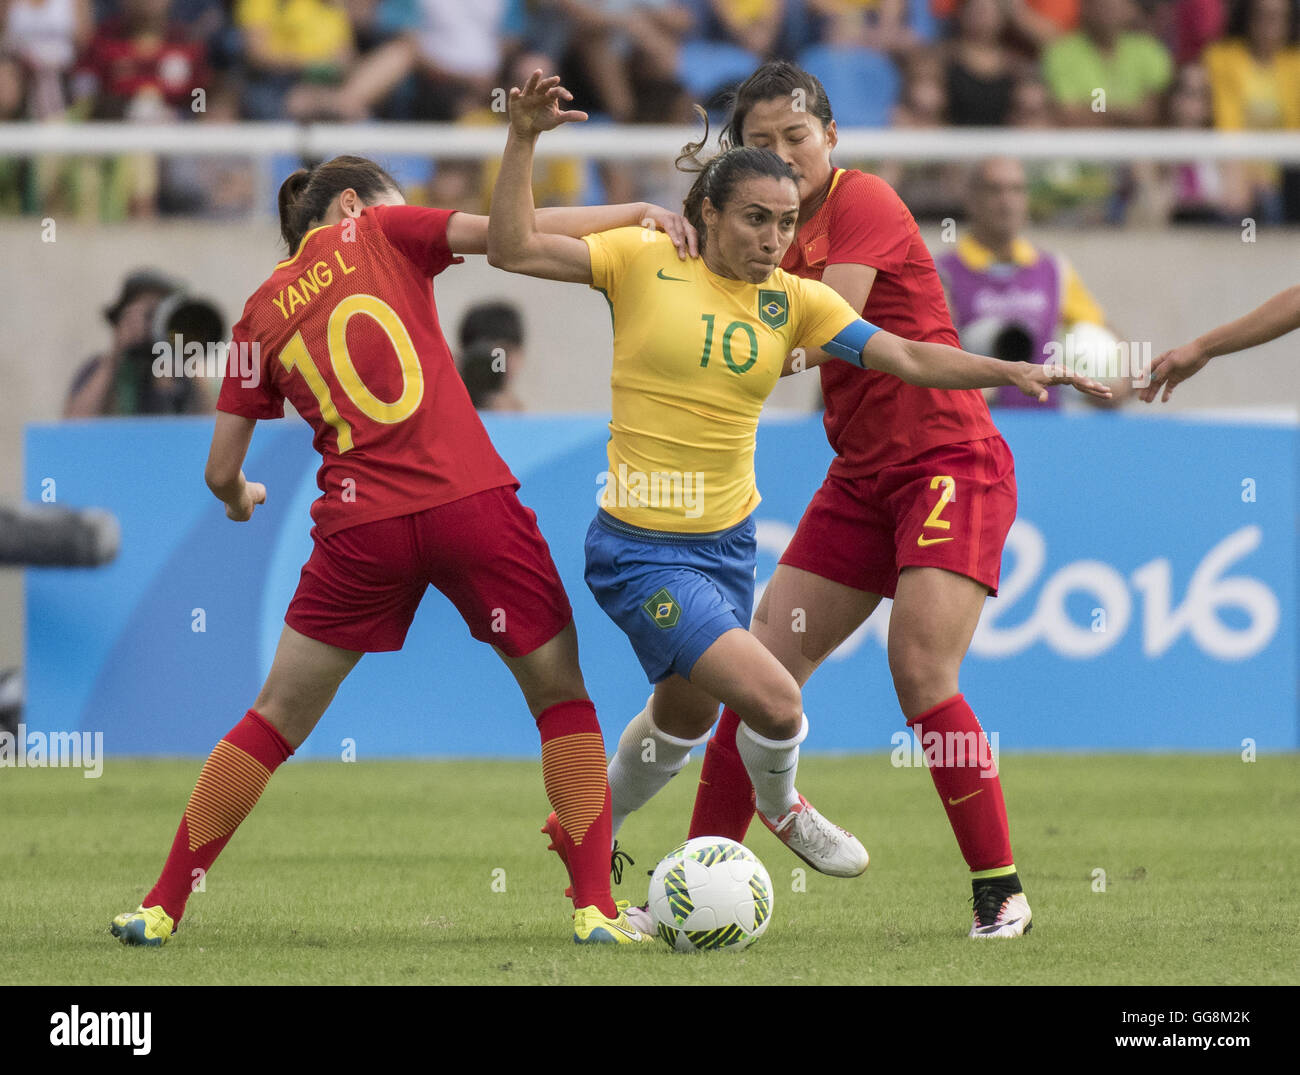 Rio de Janeiro, RJ, Brazil. 3rd Aug, 2016. Rio Olympics 2016 ''“ Li YANG (#10) of team China (left), MARTA (#10) of team Brazil (middle) and Shanshan LIU (#2) of team China in first round soccer action at Olympic Stadium. © Christopher Morris/ZUMA Wire/Alamy Live News Stock Photo